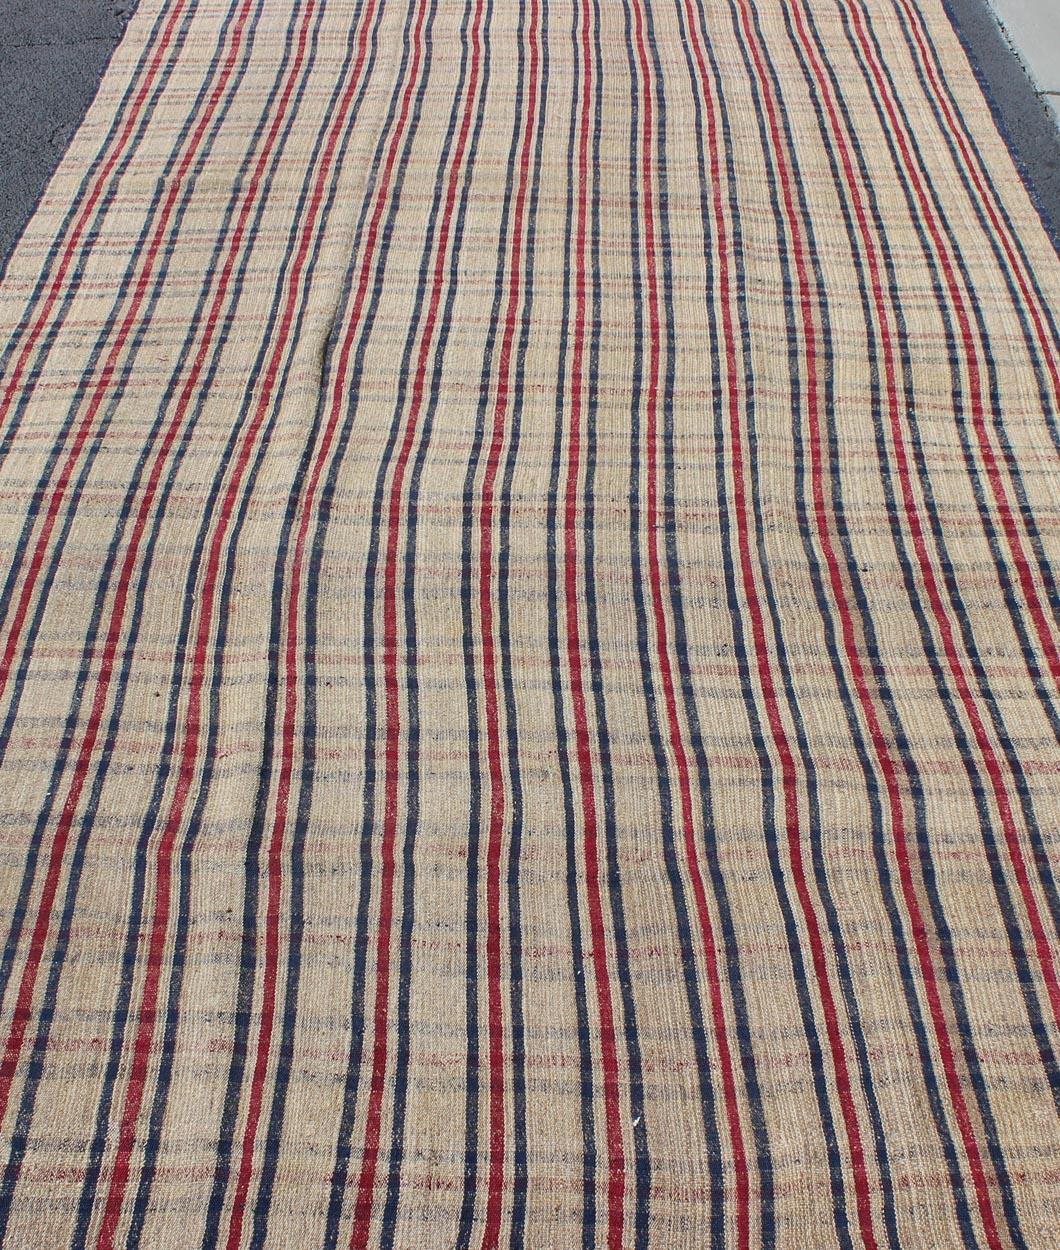 Plaid Design Vintage Turkish Kilim Rug with Stripes in Red, Navy Blue and Cream For Sale 2